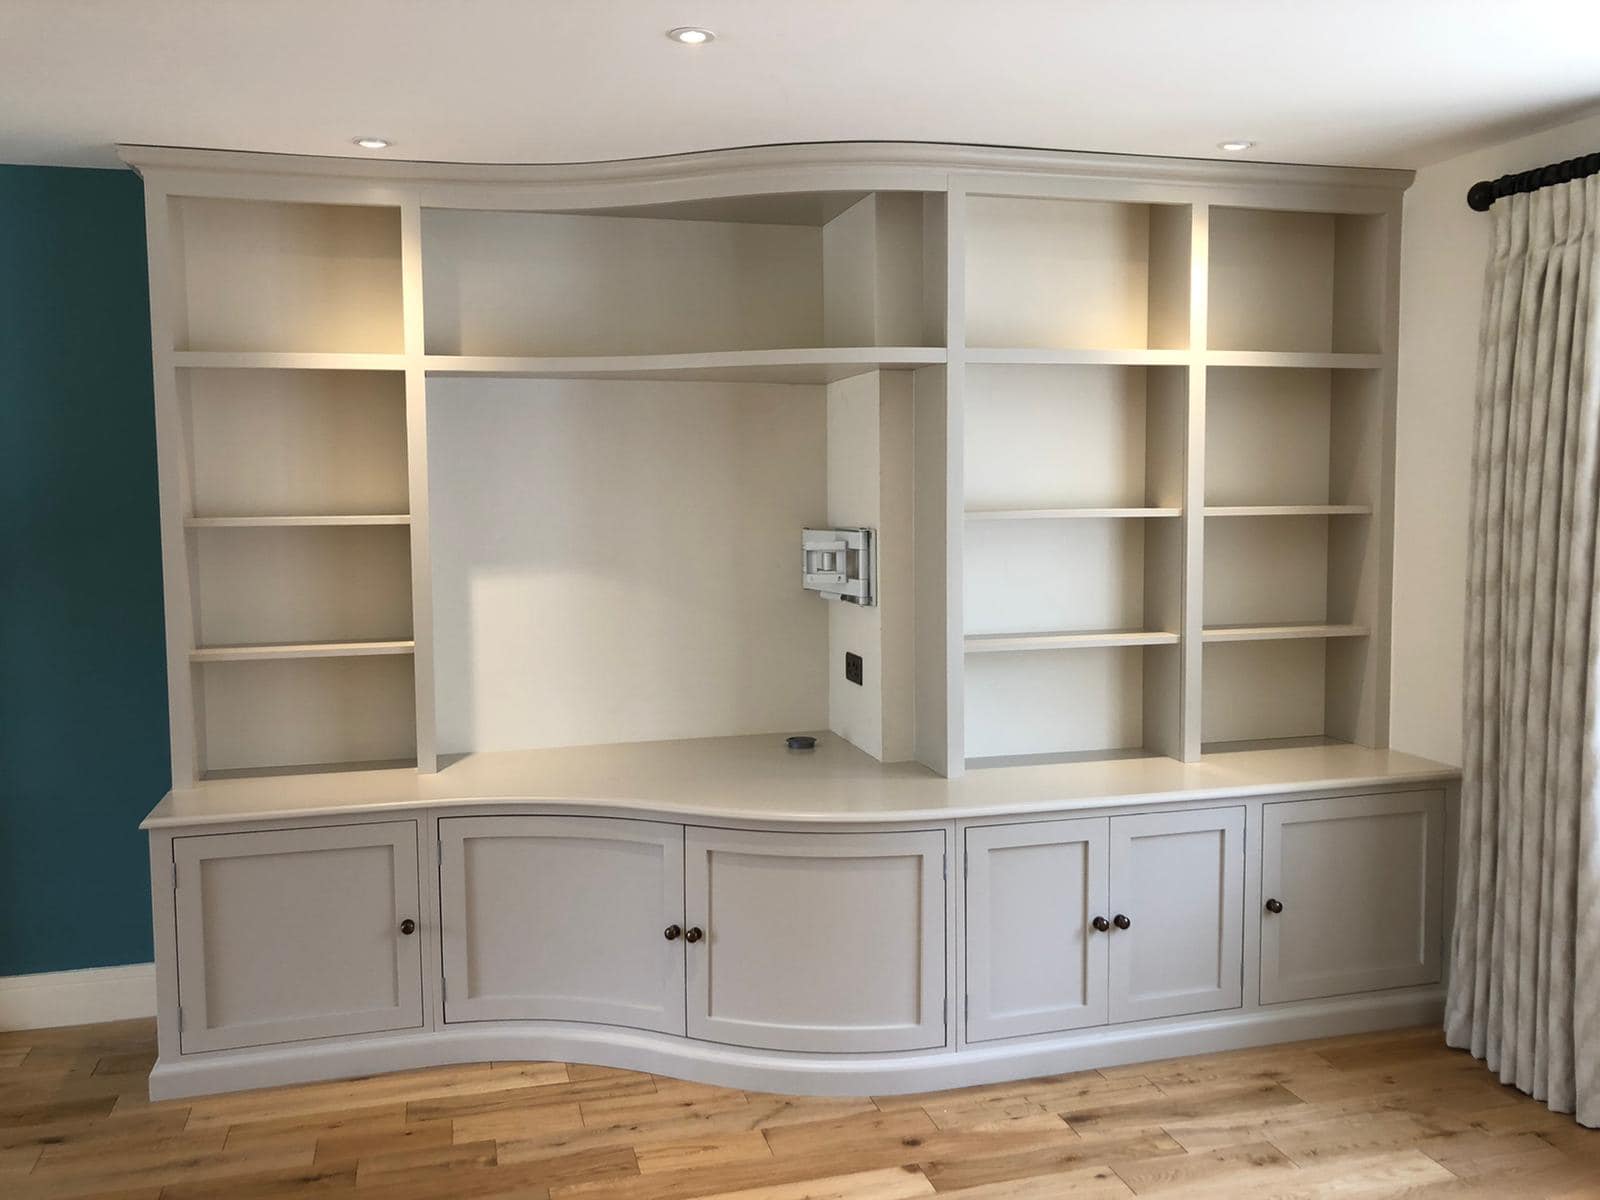 A curved book case and TV unit in a well lit room